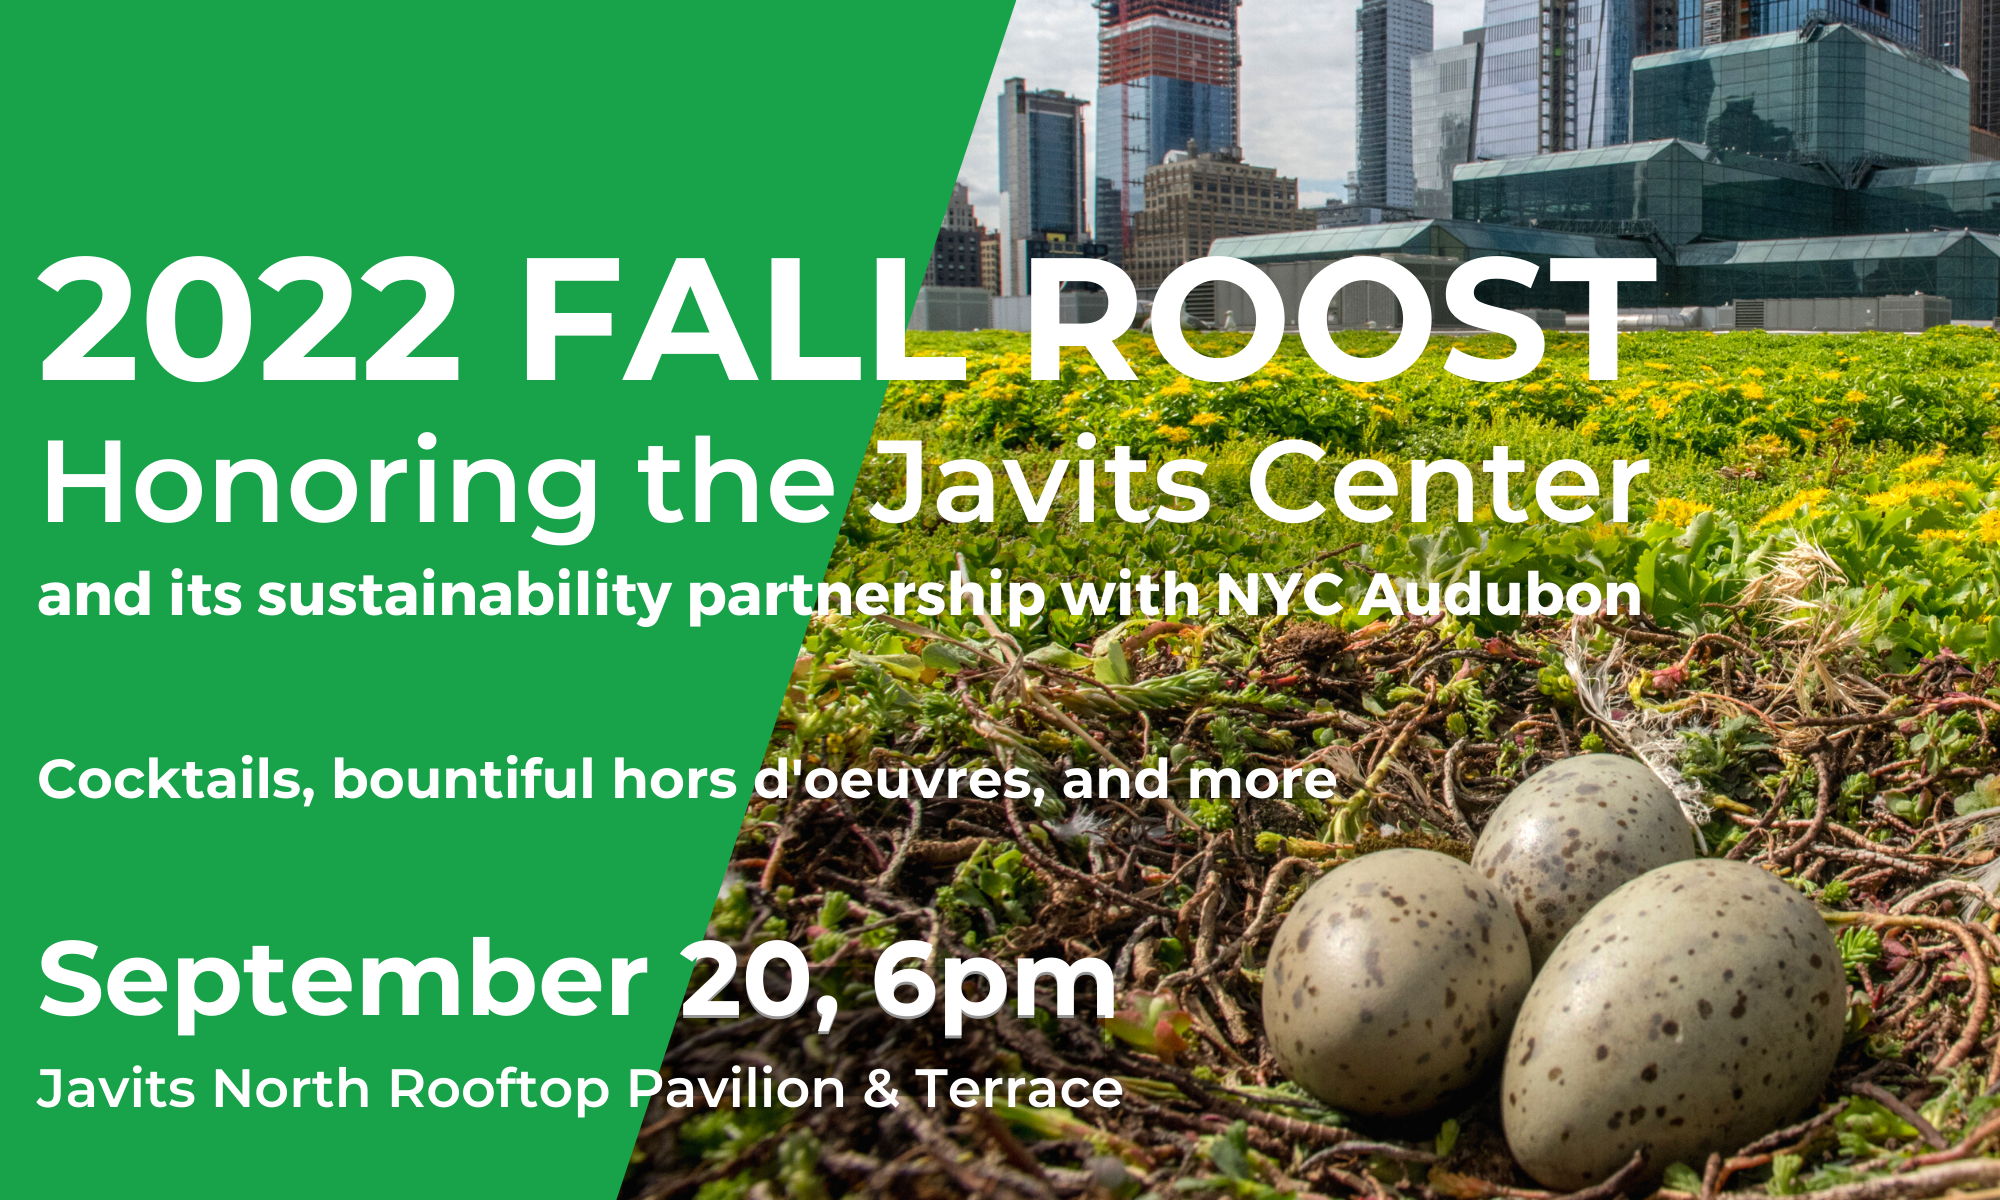 2022 Fall Roost, honoring the Javits Center, September 20, 6pm, at the Javits North Rooftop Pavilion & Terrace